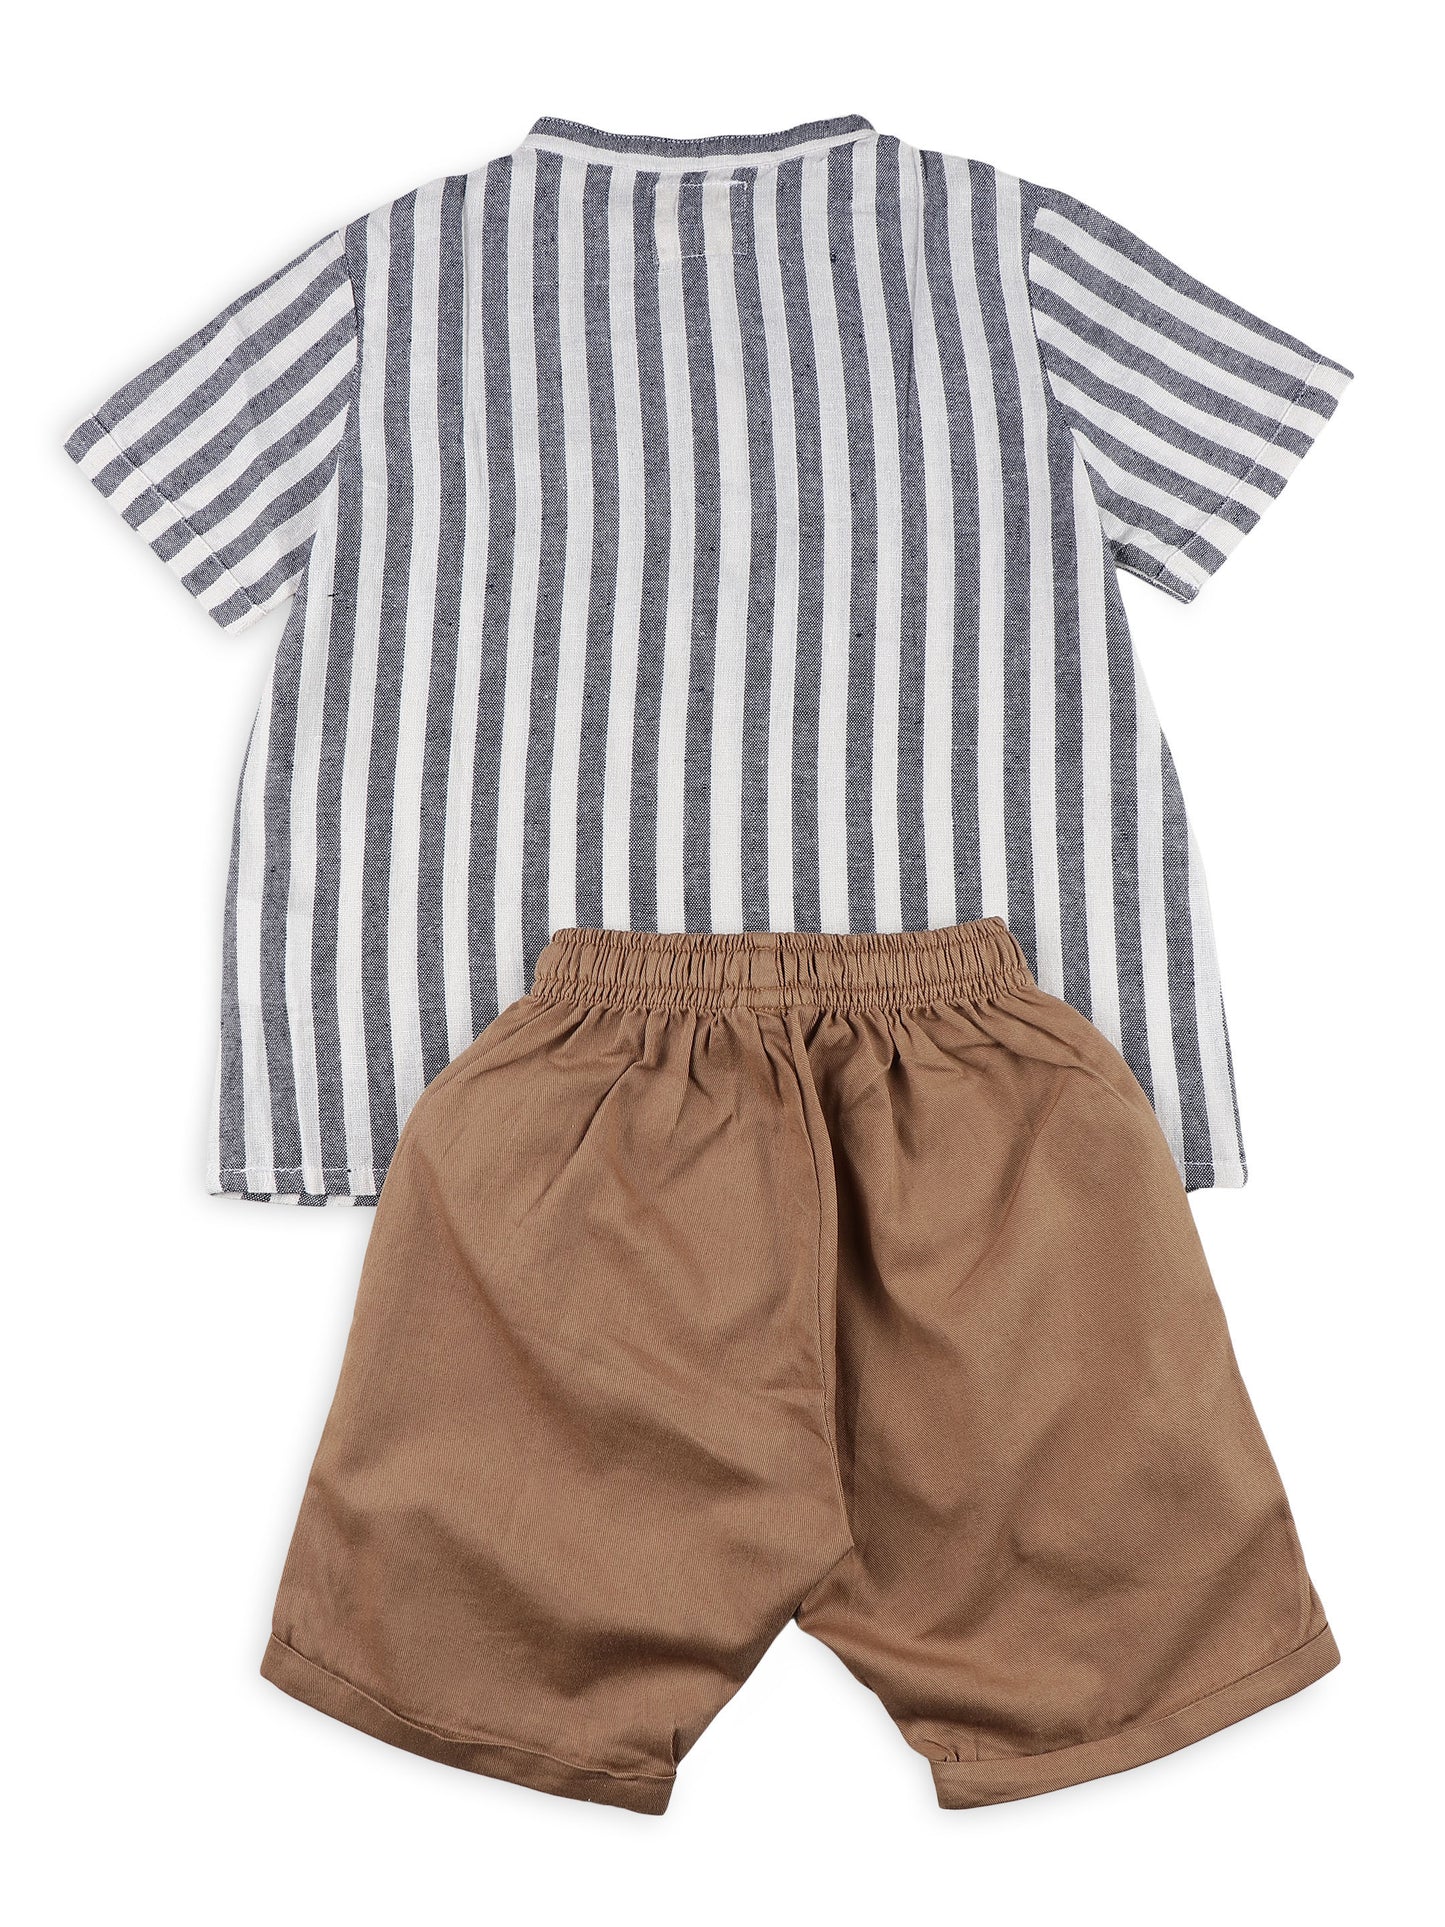 Mandarin Style Linen Clothing Sets for Boys- Grey & Brown